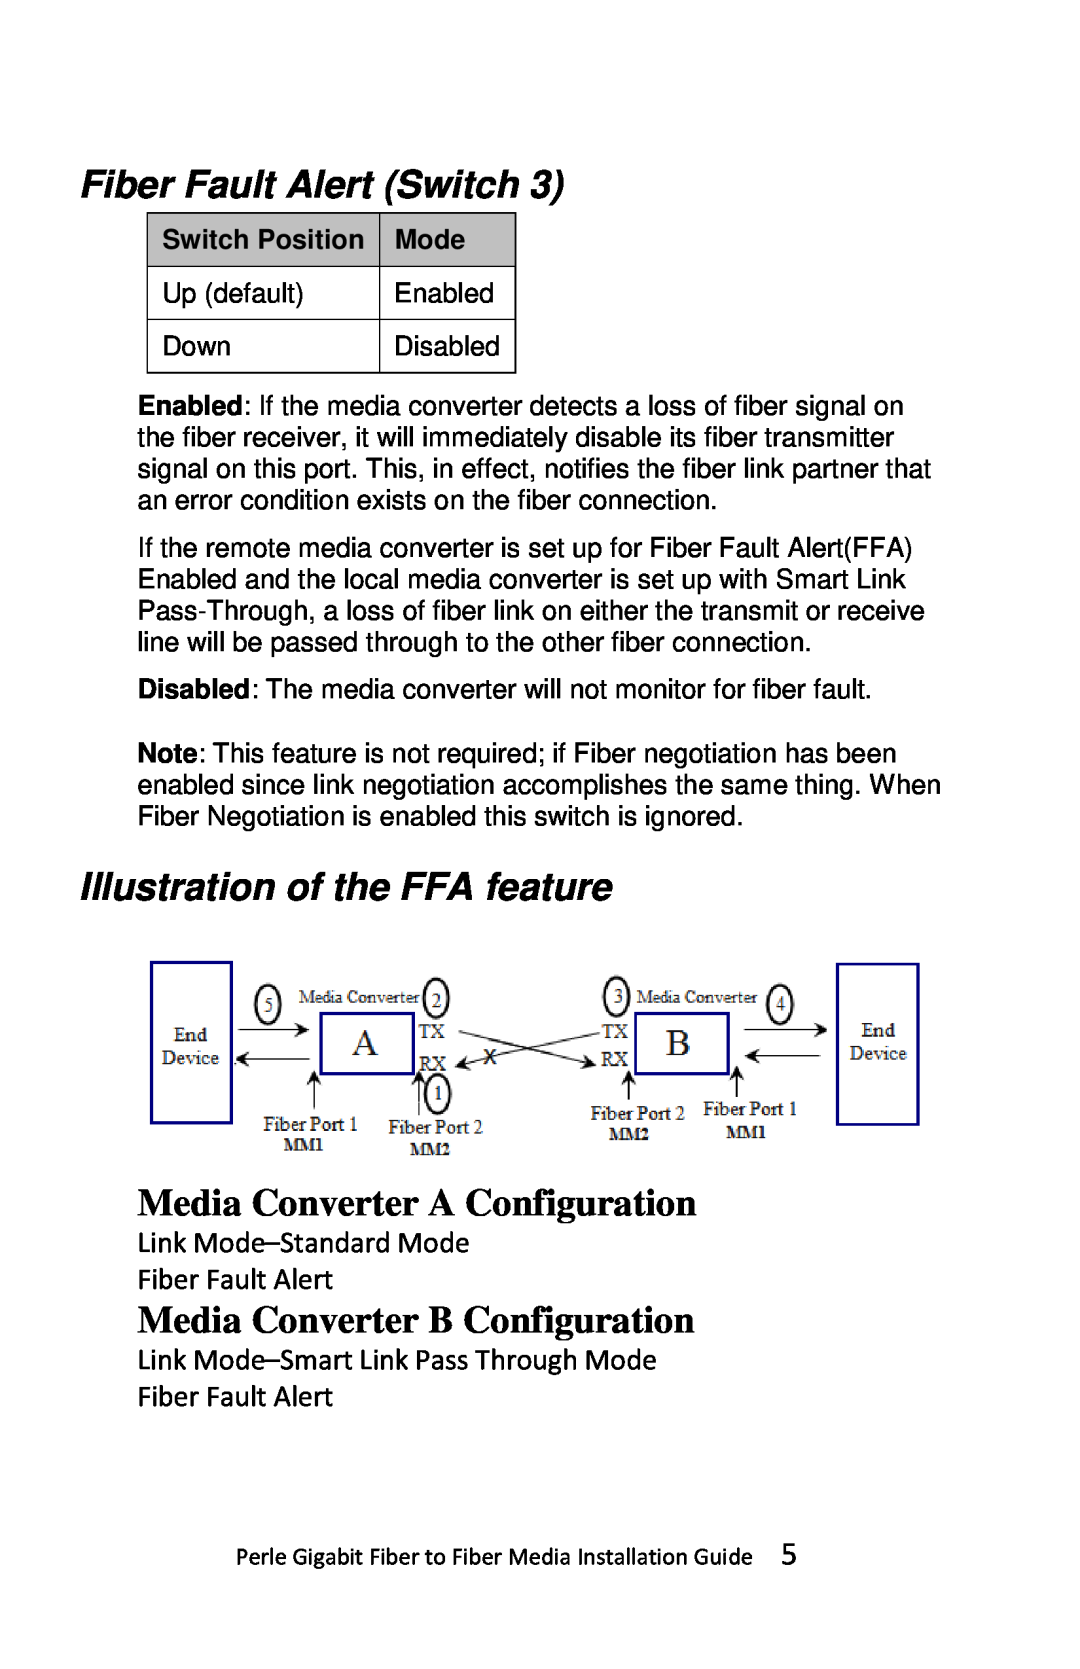 Perle Systems S-1000MM-XXXXXX Fiber Fault Alert Switch, Illustration of the FFA feature, Media Converter A Configuration 